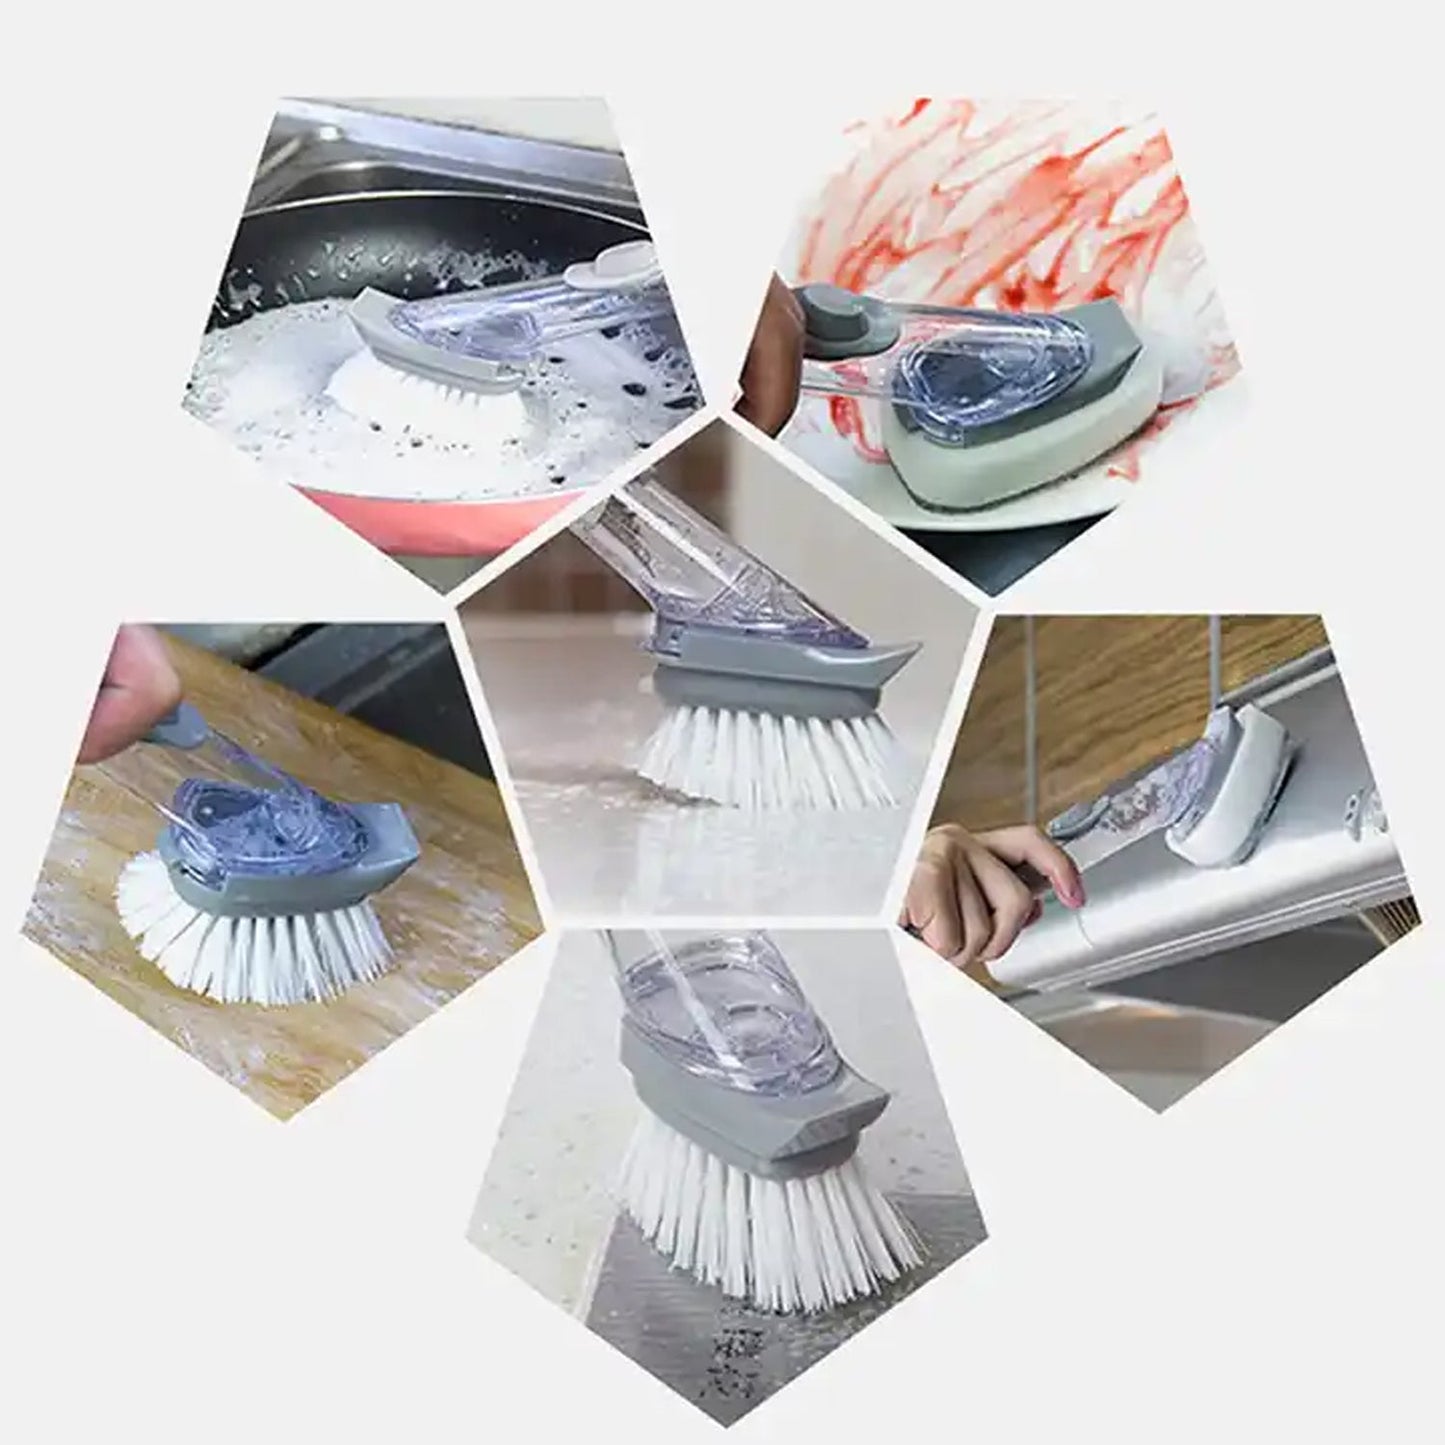 Home & Kitchen Cleaning Brushes, Scrubber, Soap Dispenser Scrub Brush for Pans Pots and Bathtub Sink (5 In 1 / 2 In 1)